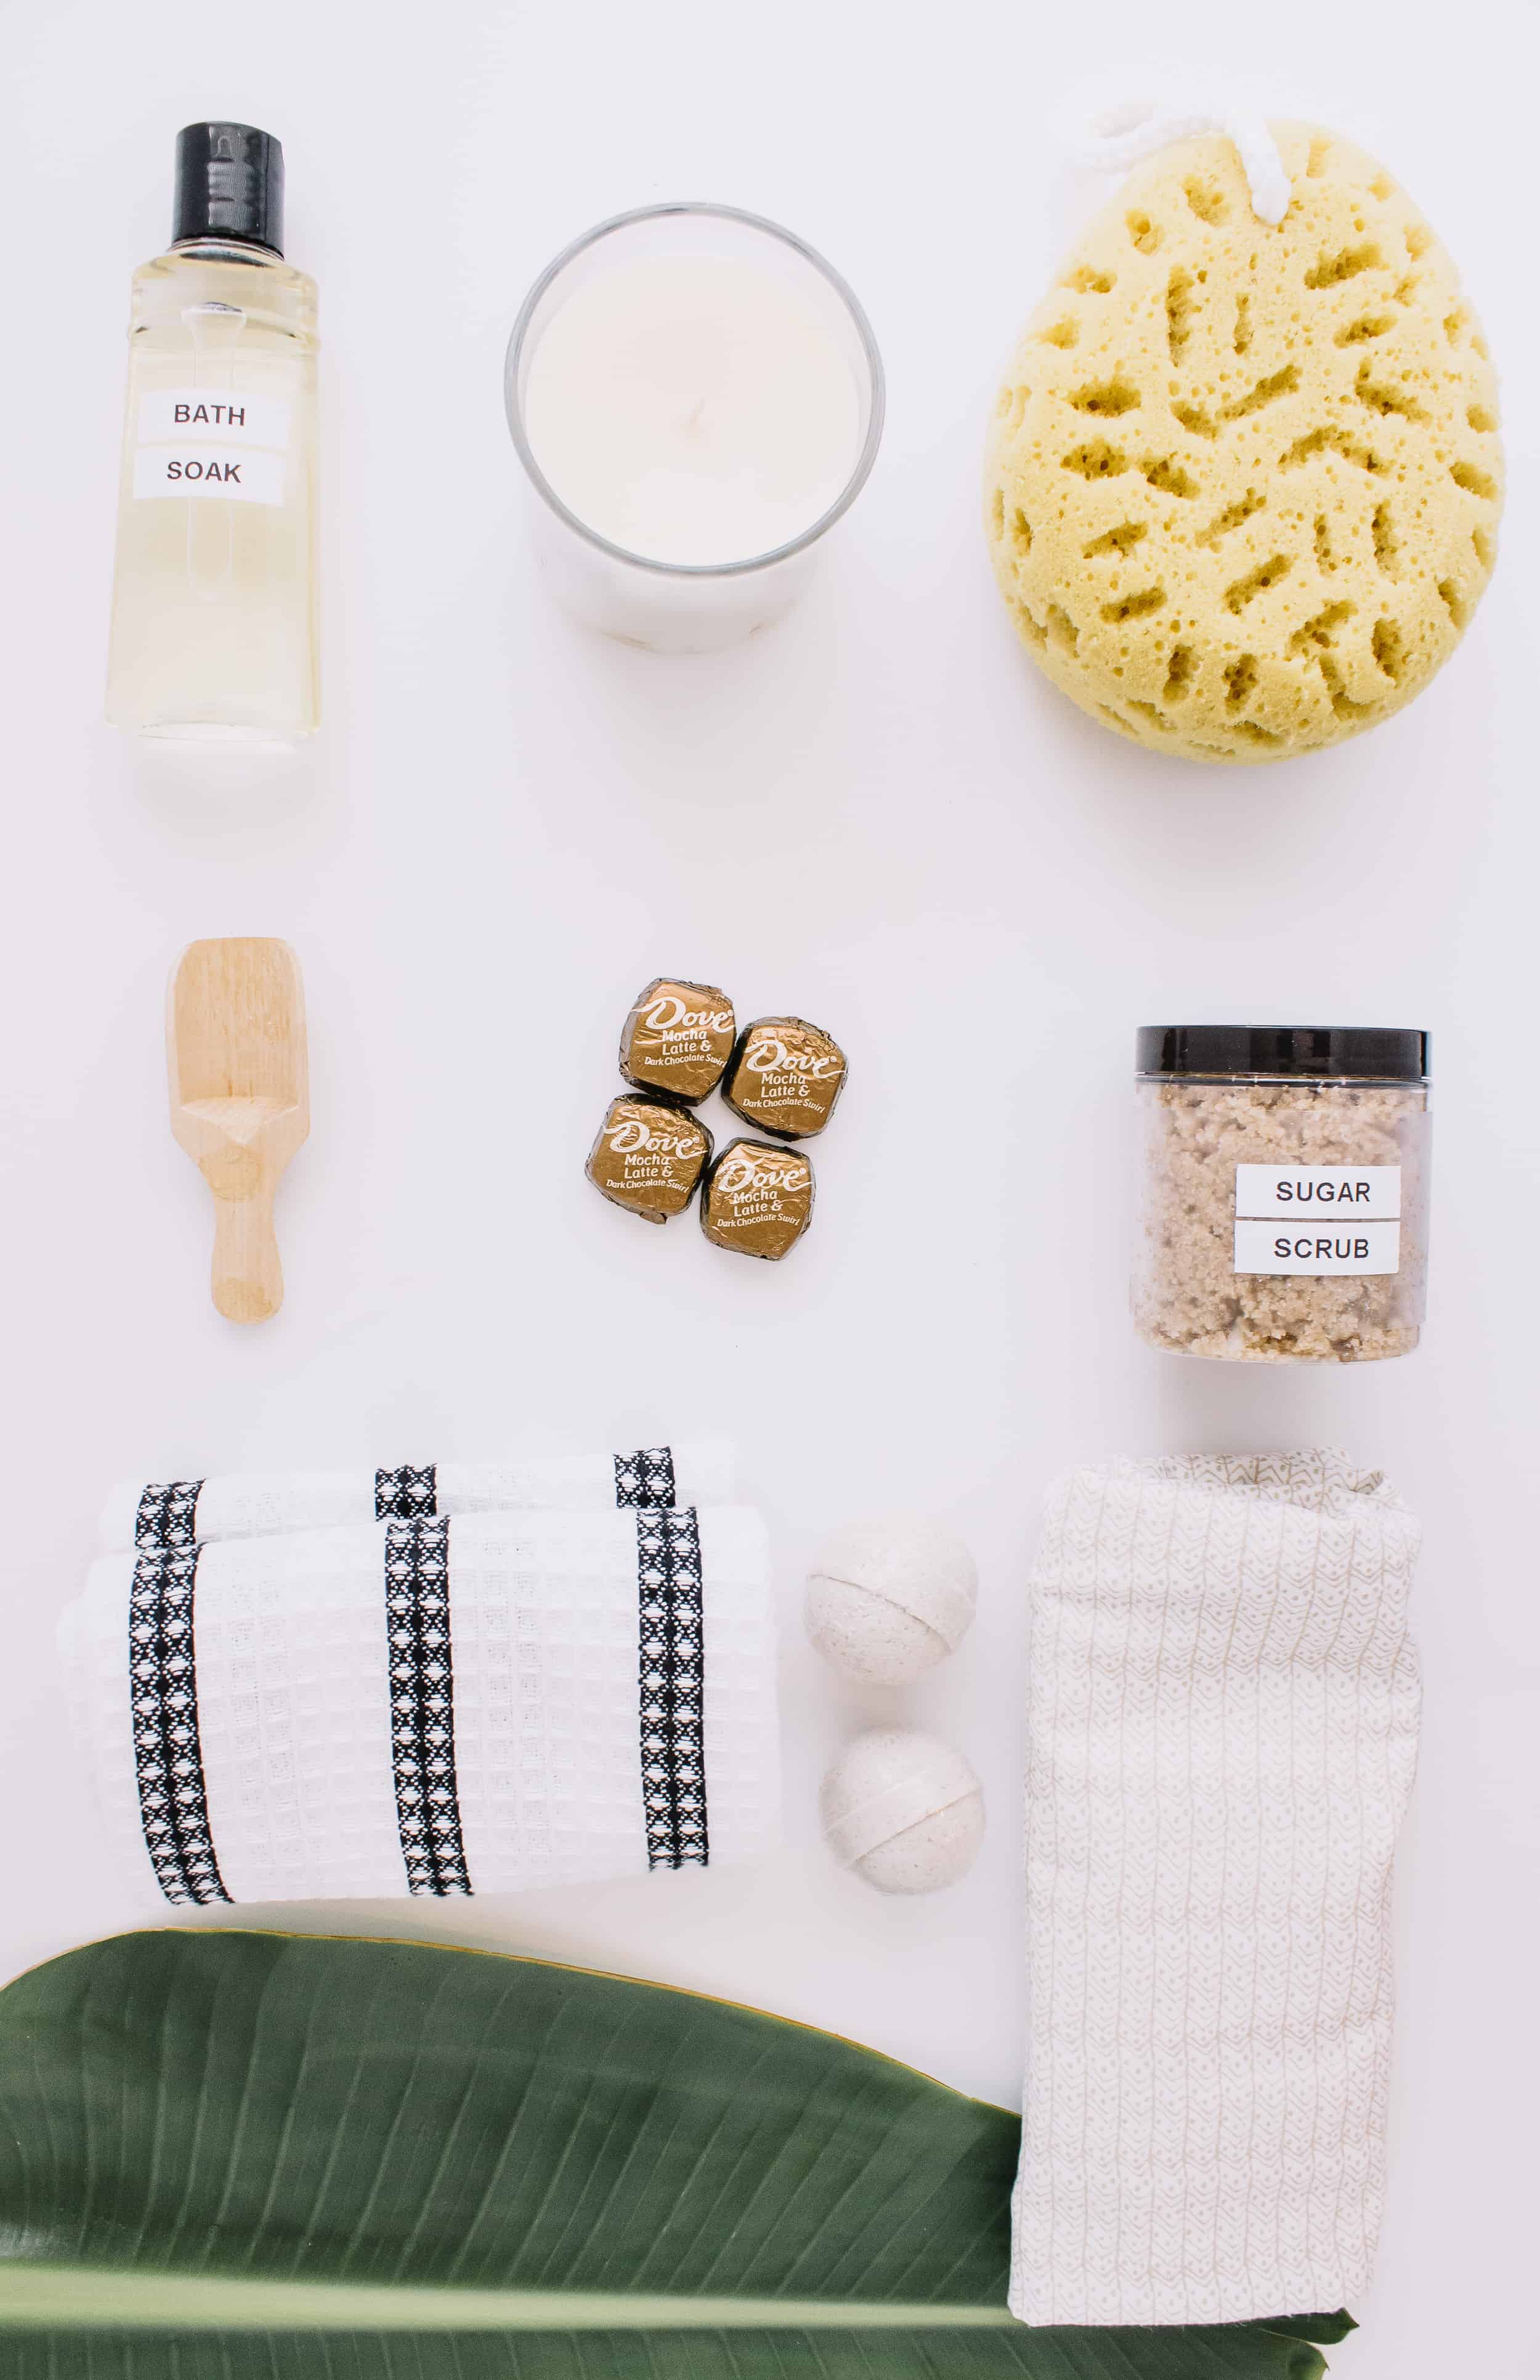 The perfect diy spa kit to unwind and relax at home. Also a great gift idea for mom to enjoy on her birthday, Christmas or Mother's Day. // @dovechocolateus #UnwindWithDove #ad